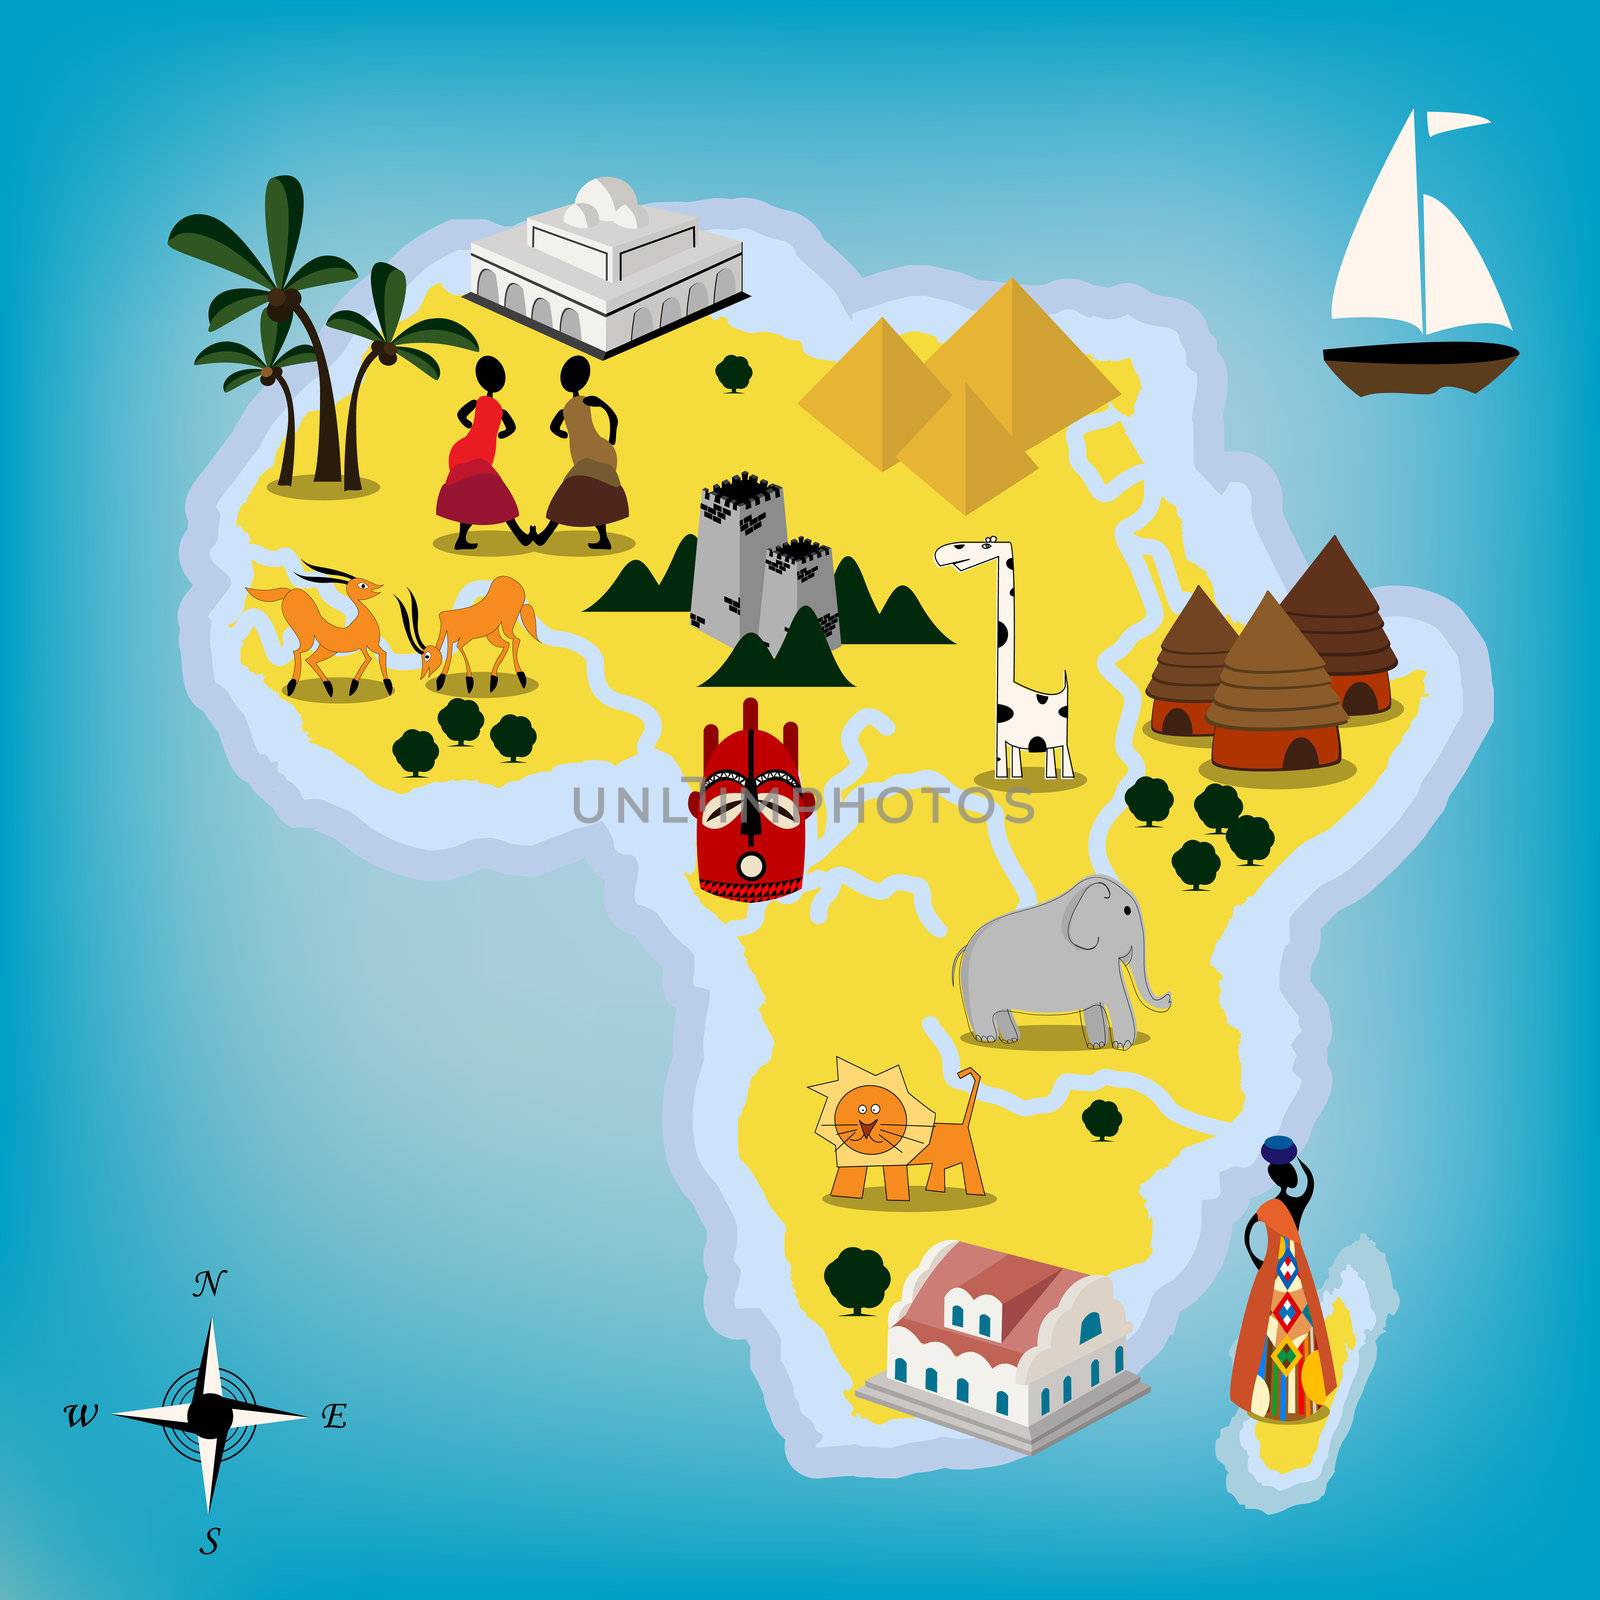 Africa map by Lirch